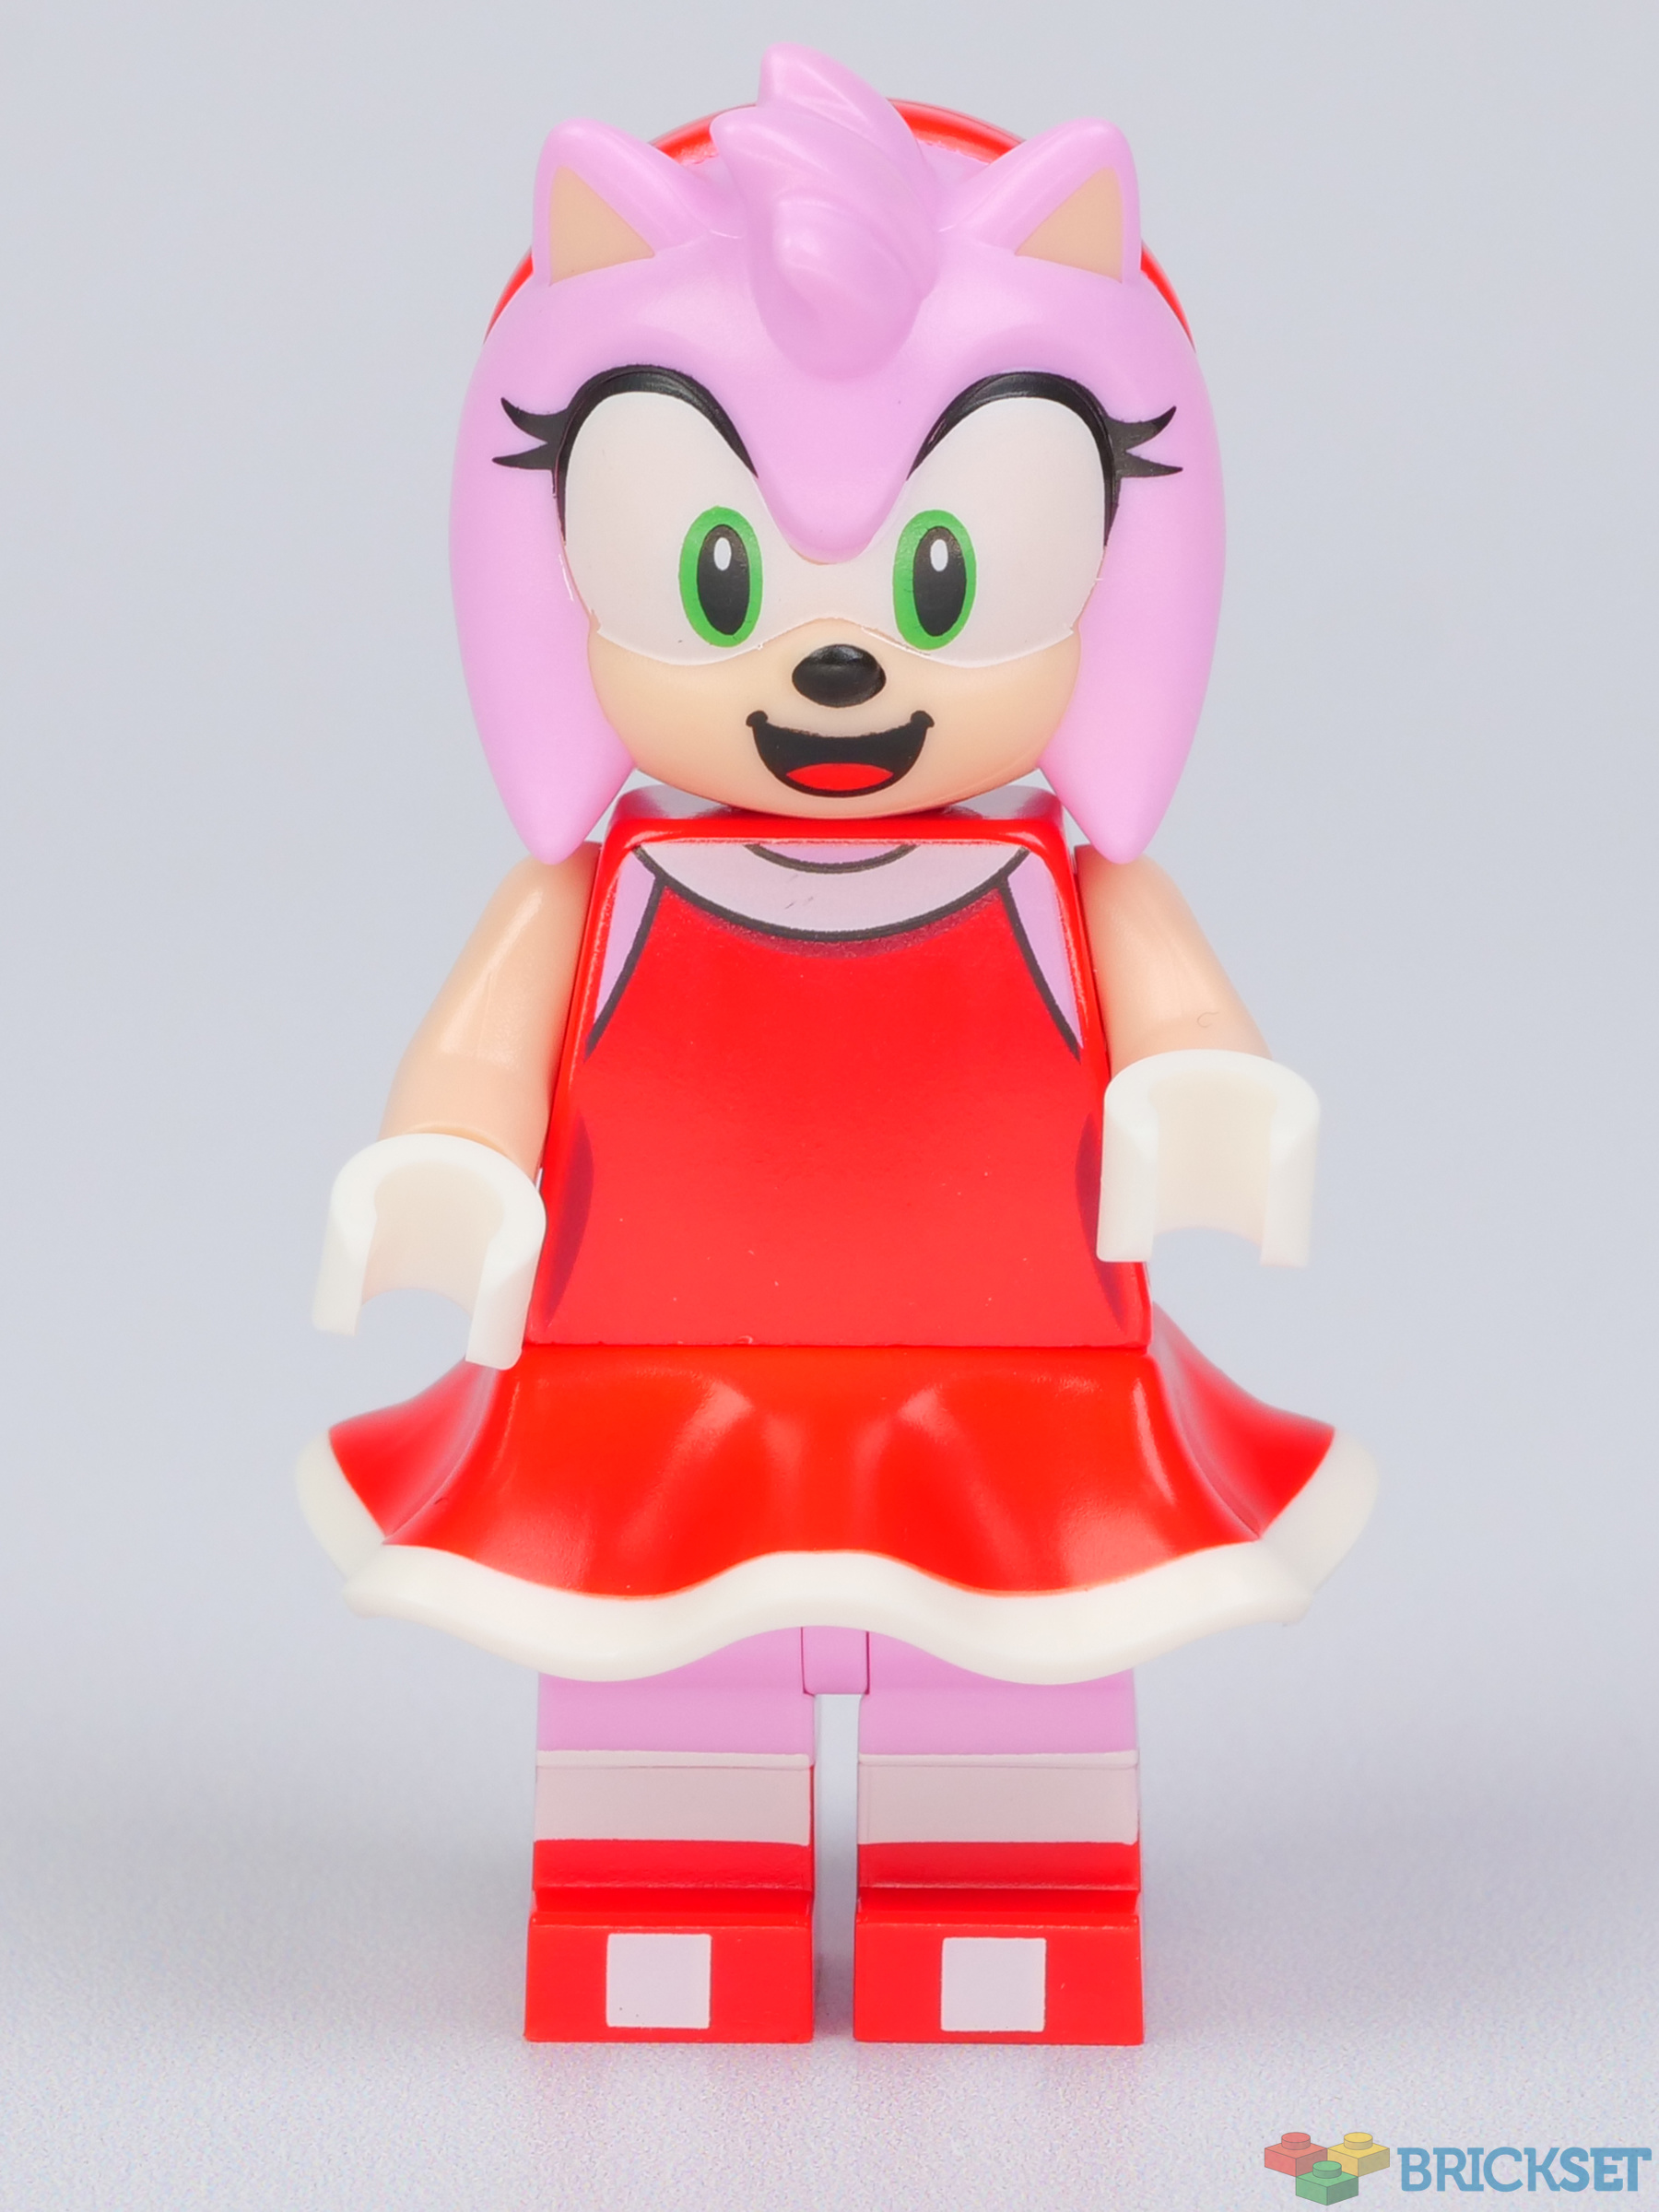 Sonic The Hedgehog Gets Four New LEGO Sets, Features Tails And Amy